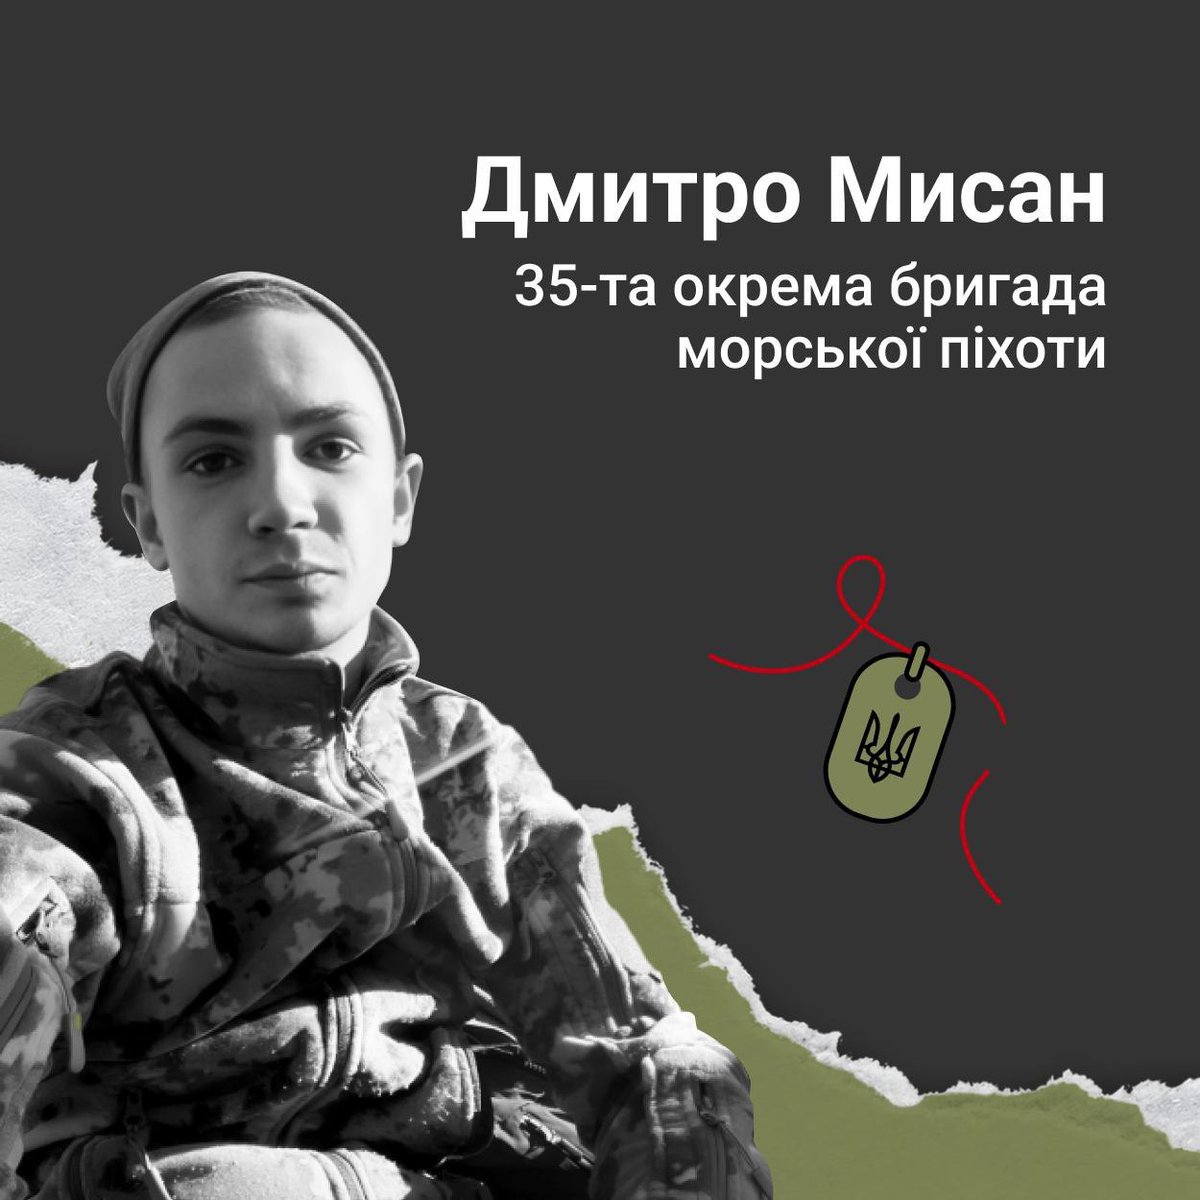 Sailor Dmytro Mysan died on June 10, 2023 in Donetsk region.

While rescuing his comrades under enemy artillery fire, he himself received a fatal shrapnel wound.

Dmitry was 23 years old. Lived in Khmelnytskyi region. He was left without parents at an early age, so he was raised